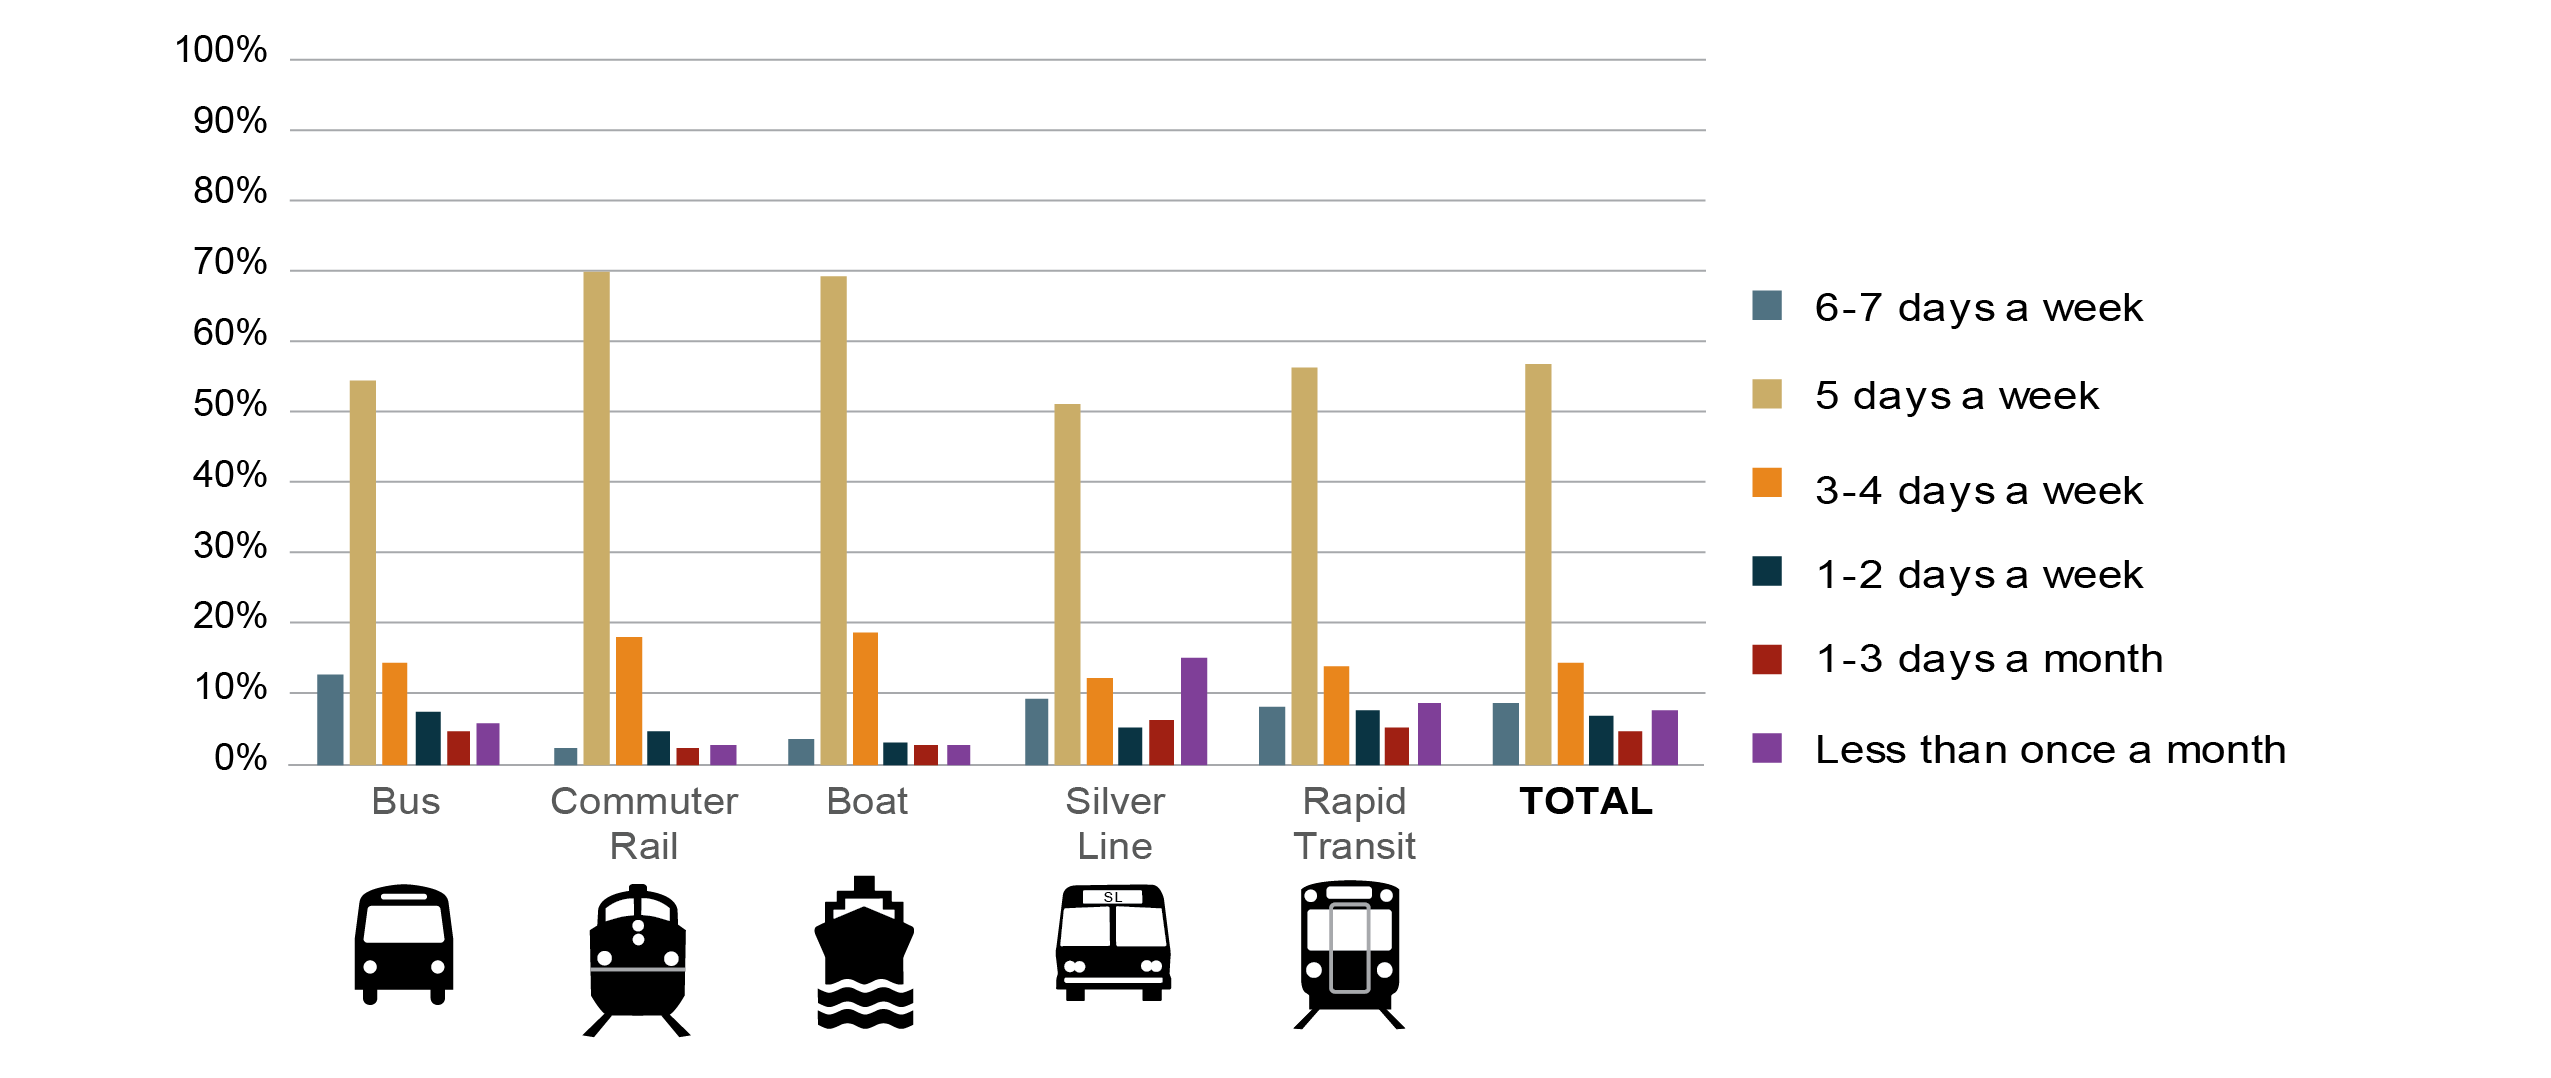 Figure 10 is a series of bar graphs showing the percentage distributions of frequency of passenger use of each MBTA service mode as reported in the 2015-17 survey.